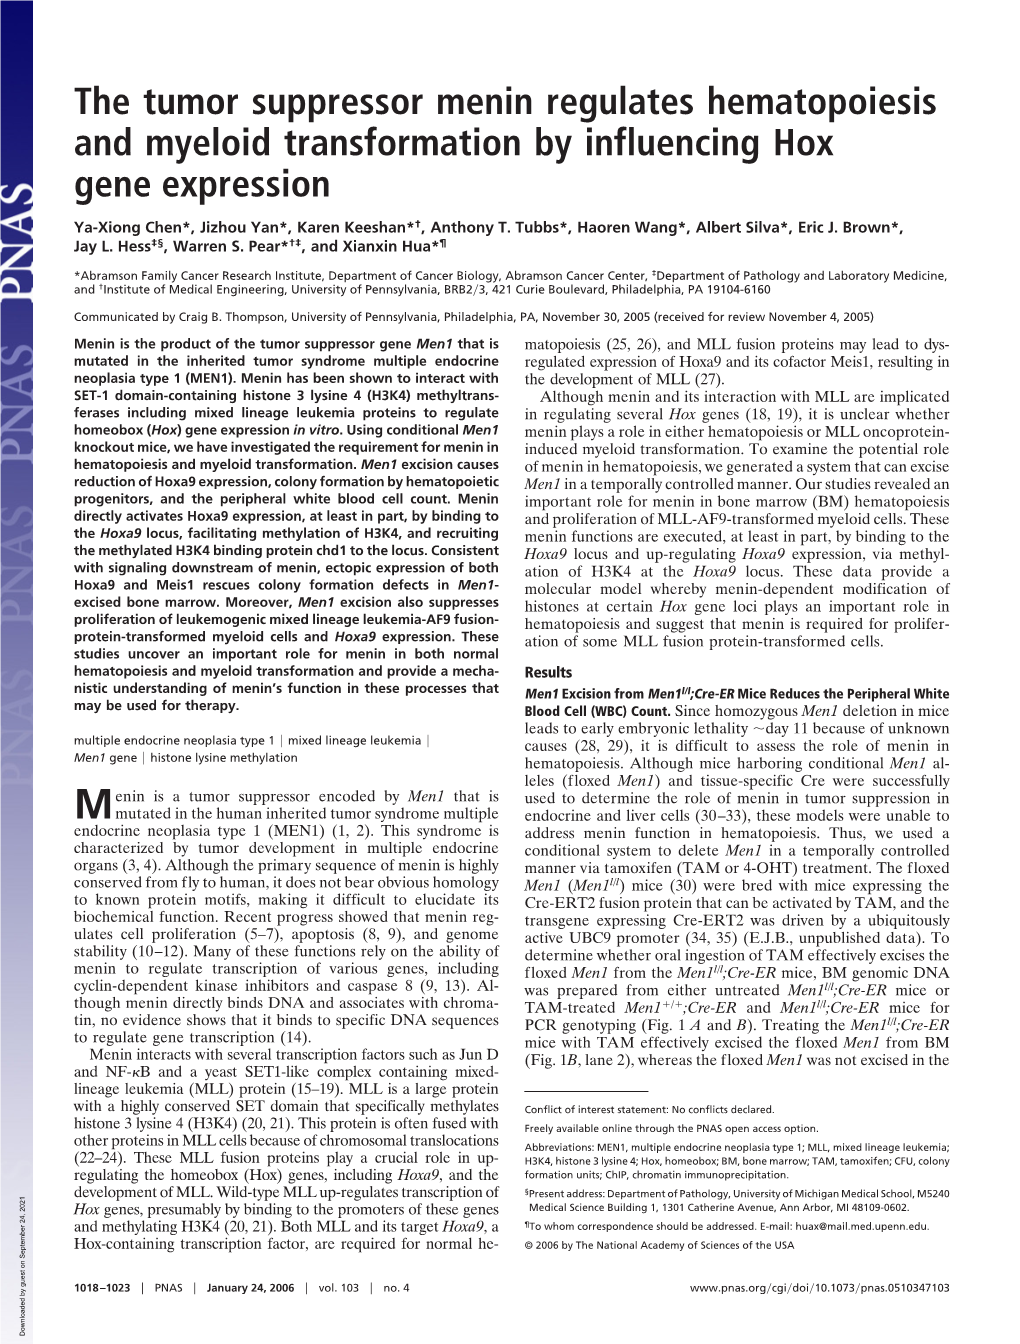 The Tumor Suppressor Menin Regulates Hematopoiesis and Myeloid Transformation by Influencing Hox Gene Expression